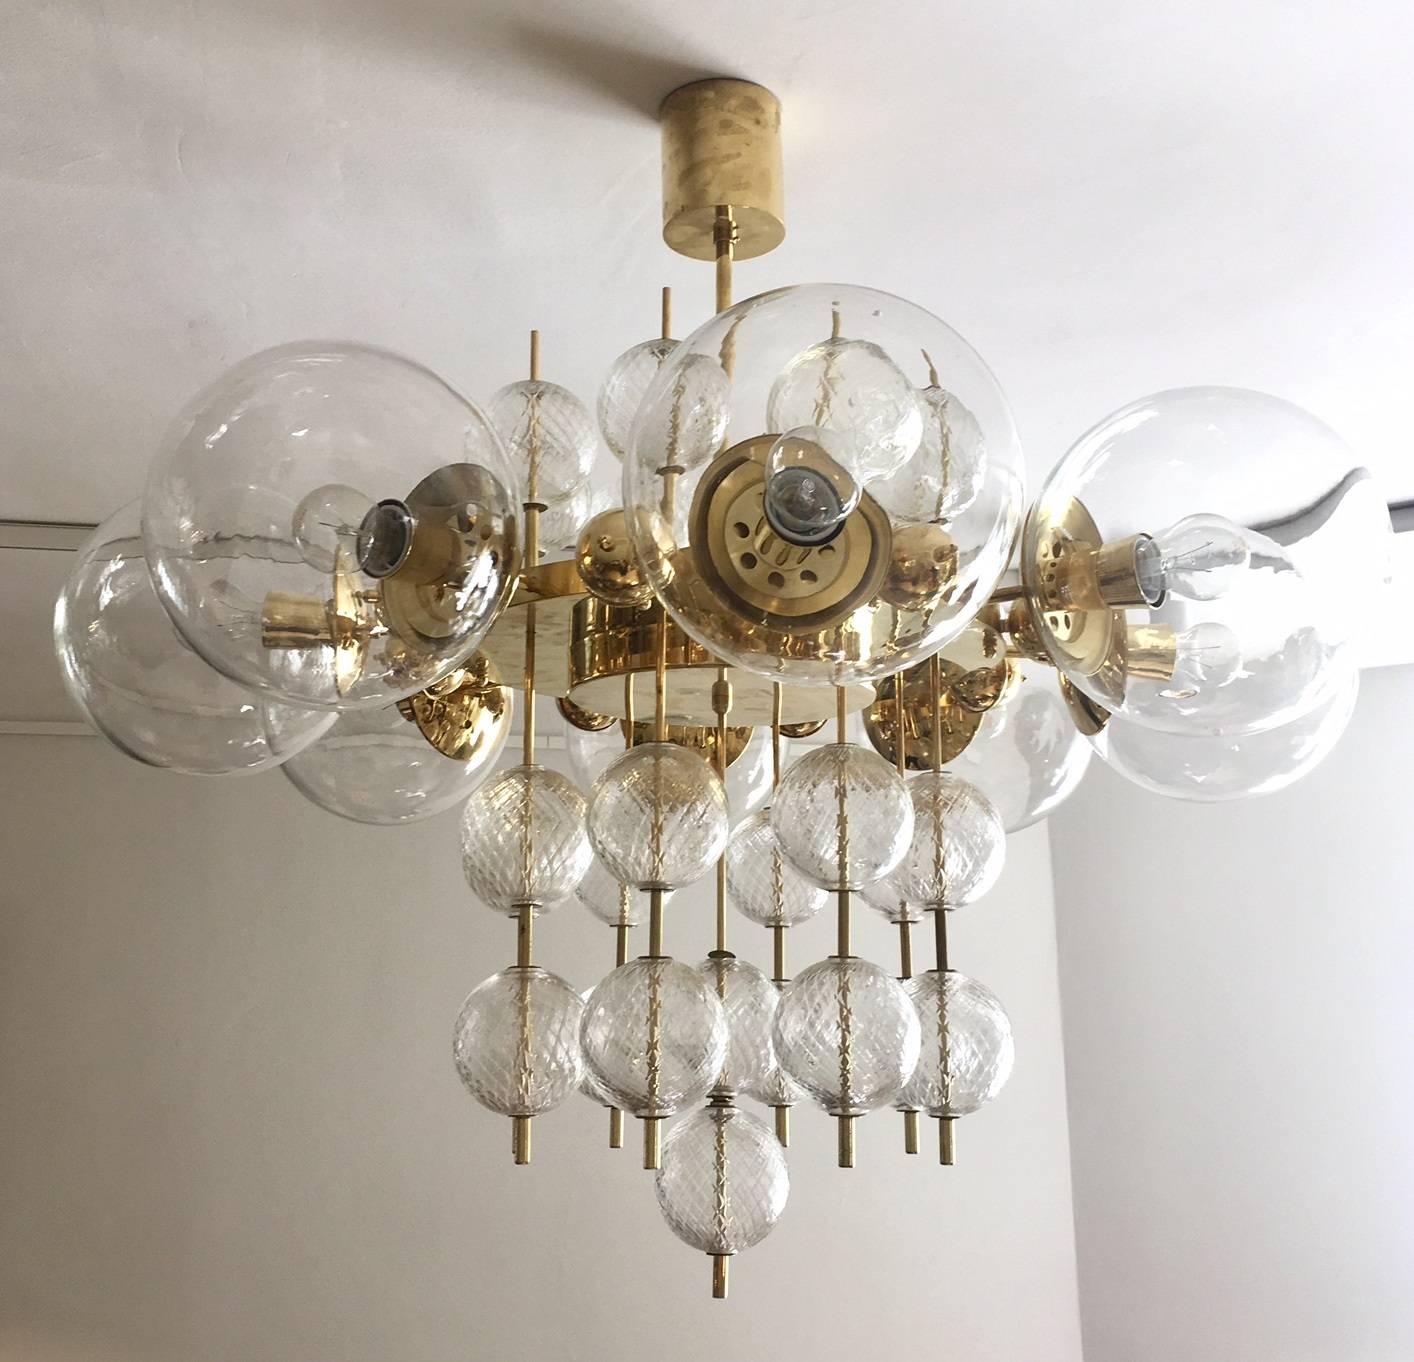 Gorgeous brass and handblown crystal chandelier with thirty five globes manufactured in Kamenicky Senov, Czechoslovakia in the 1960s. Eight larger round globes with light bulbs and twenty seven smaller diamond-patterned glass globes, brass structure.